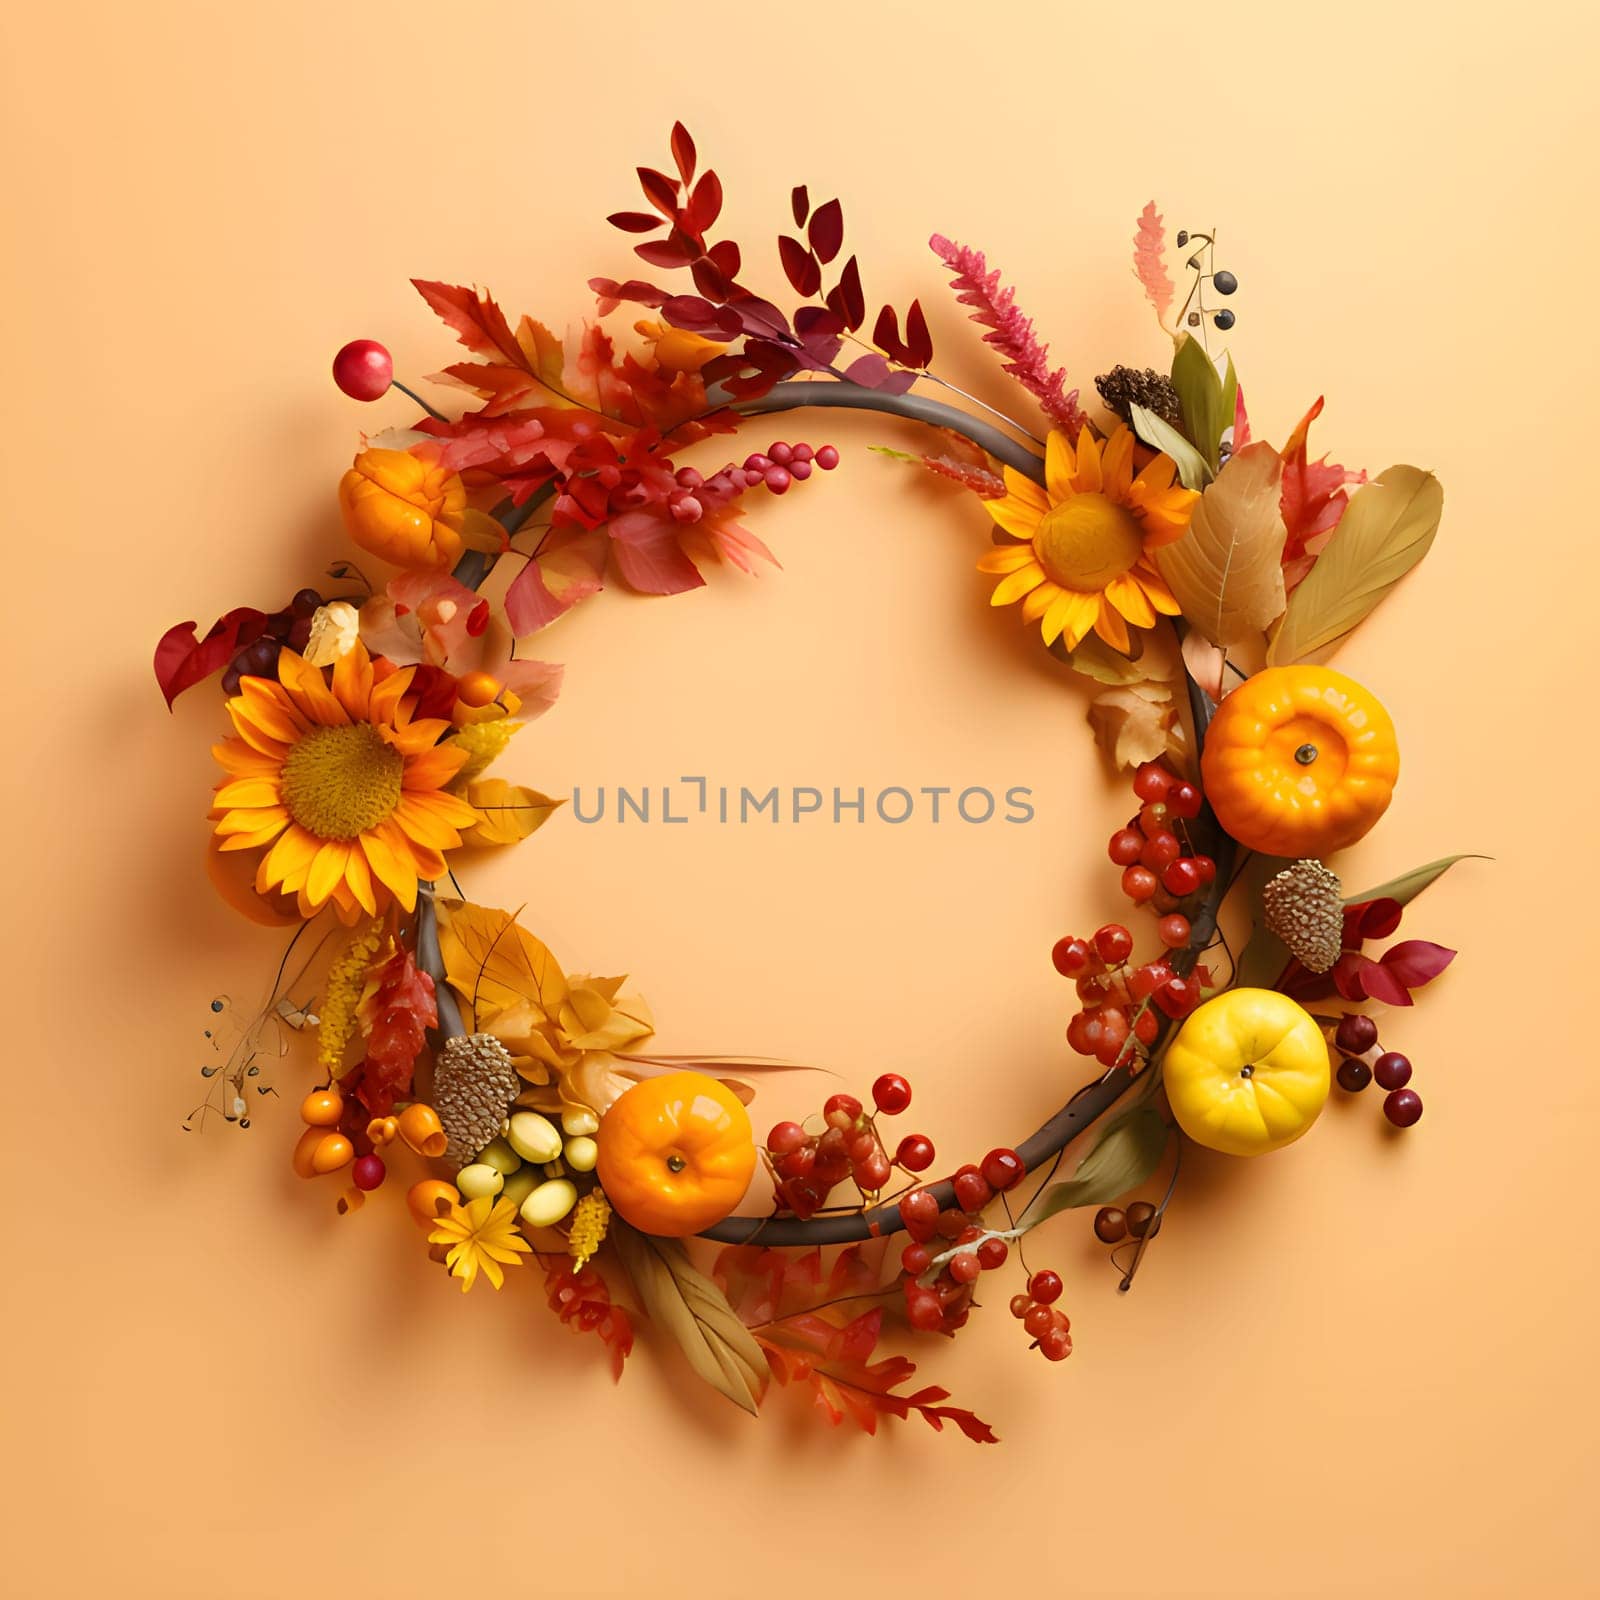 Flower crown, round frame with autumn flowers, harvest, leaves and rowan fruit, banner with space for your own content. Orange background. by ThemesS